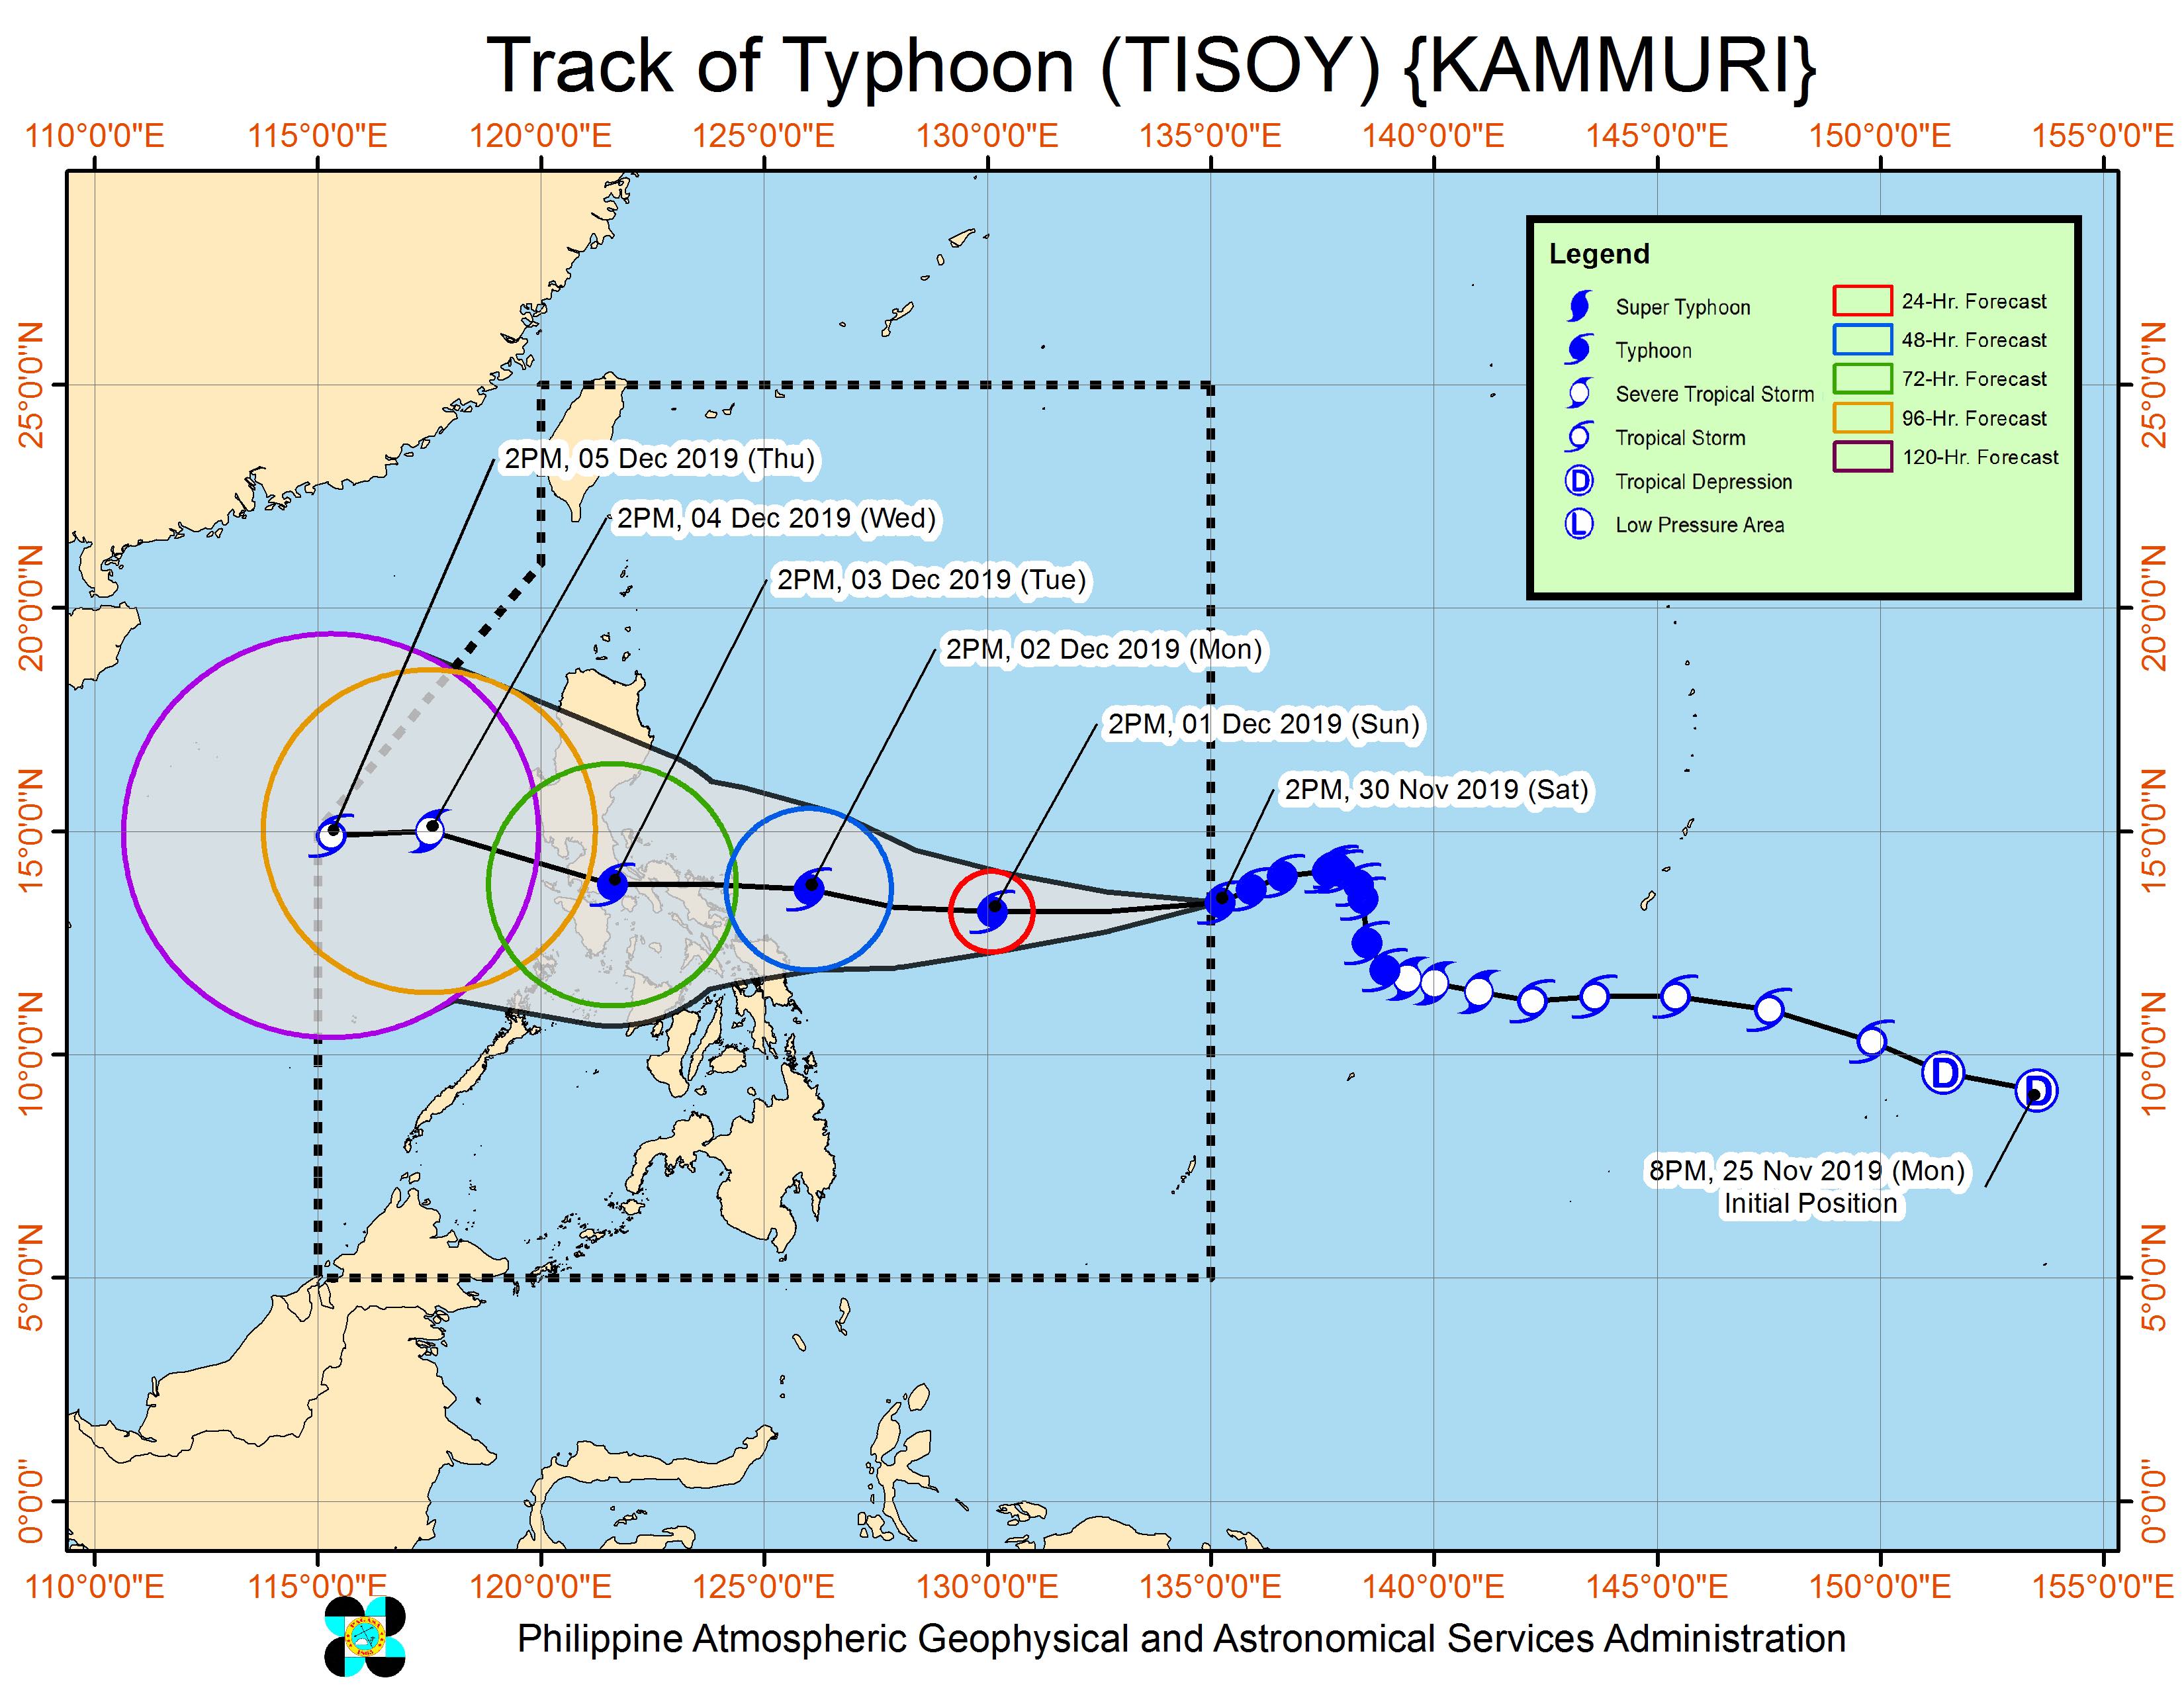 Forecast track of Typhoon Tisoy (Kammuri) as of November 30, 2019, 5 pm. Image from PAGASA 